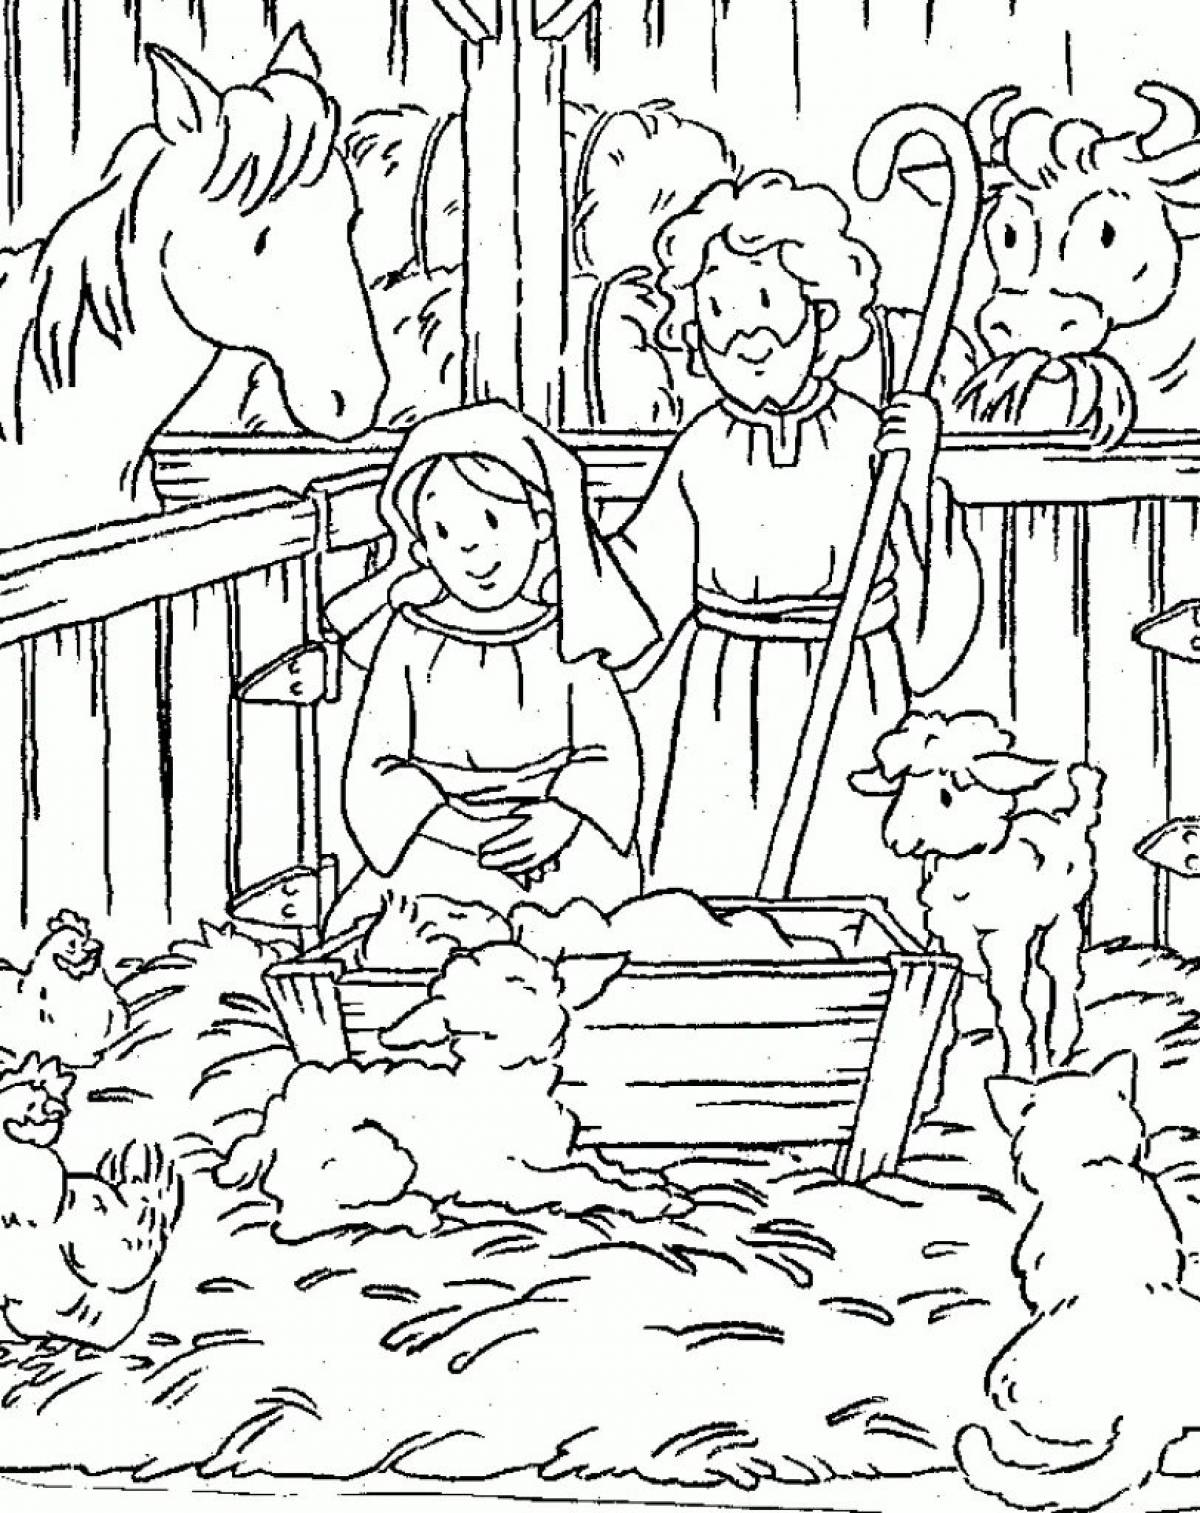 Gorgeous jesus in the manger coloring book